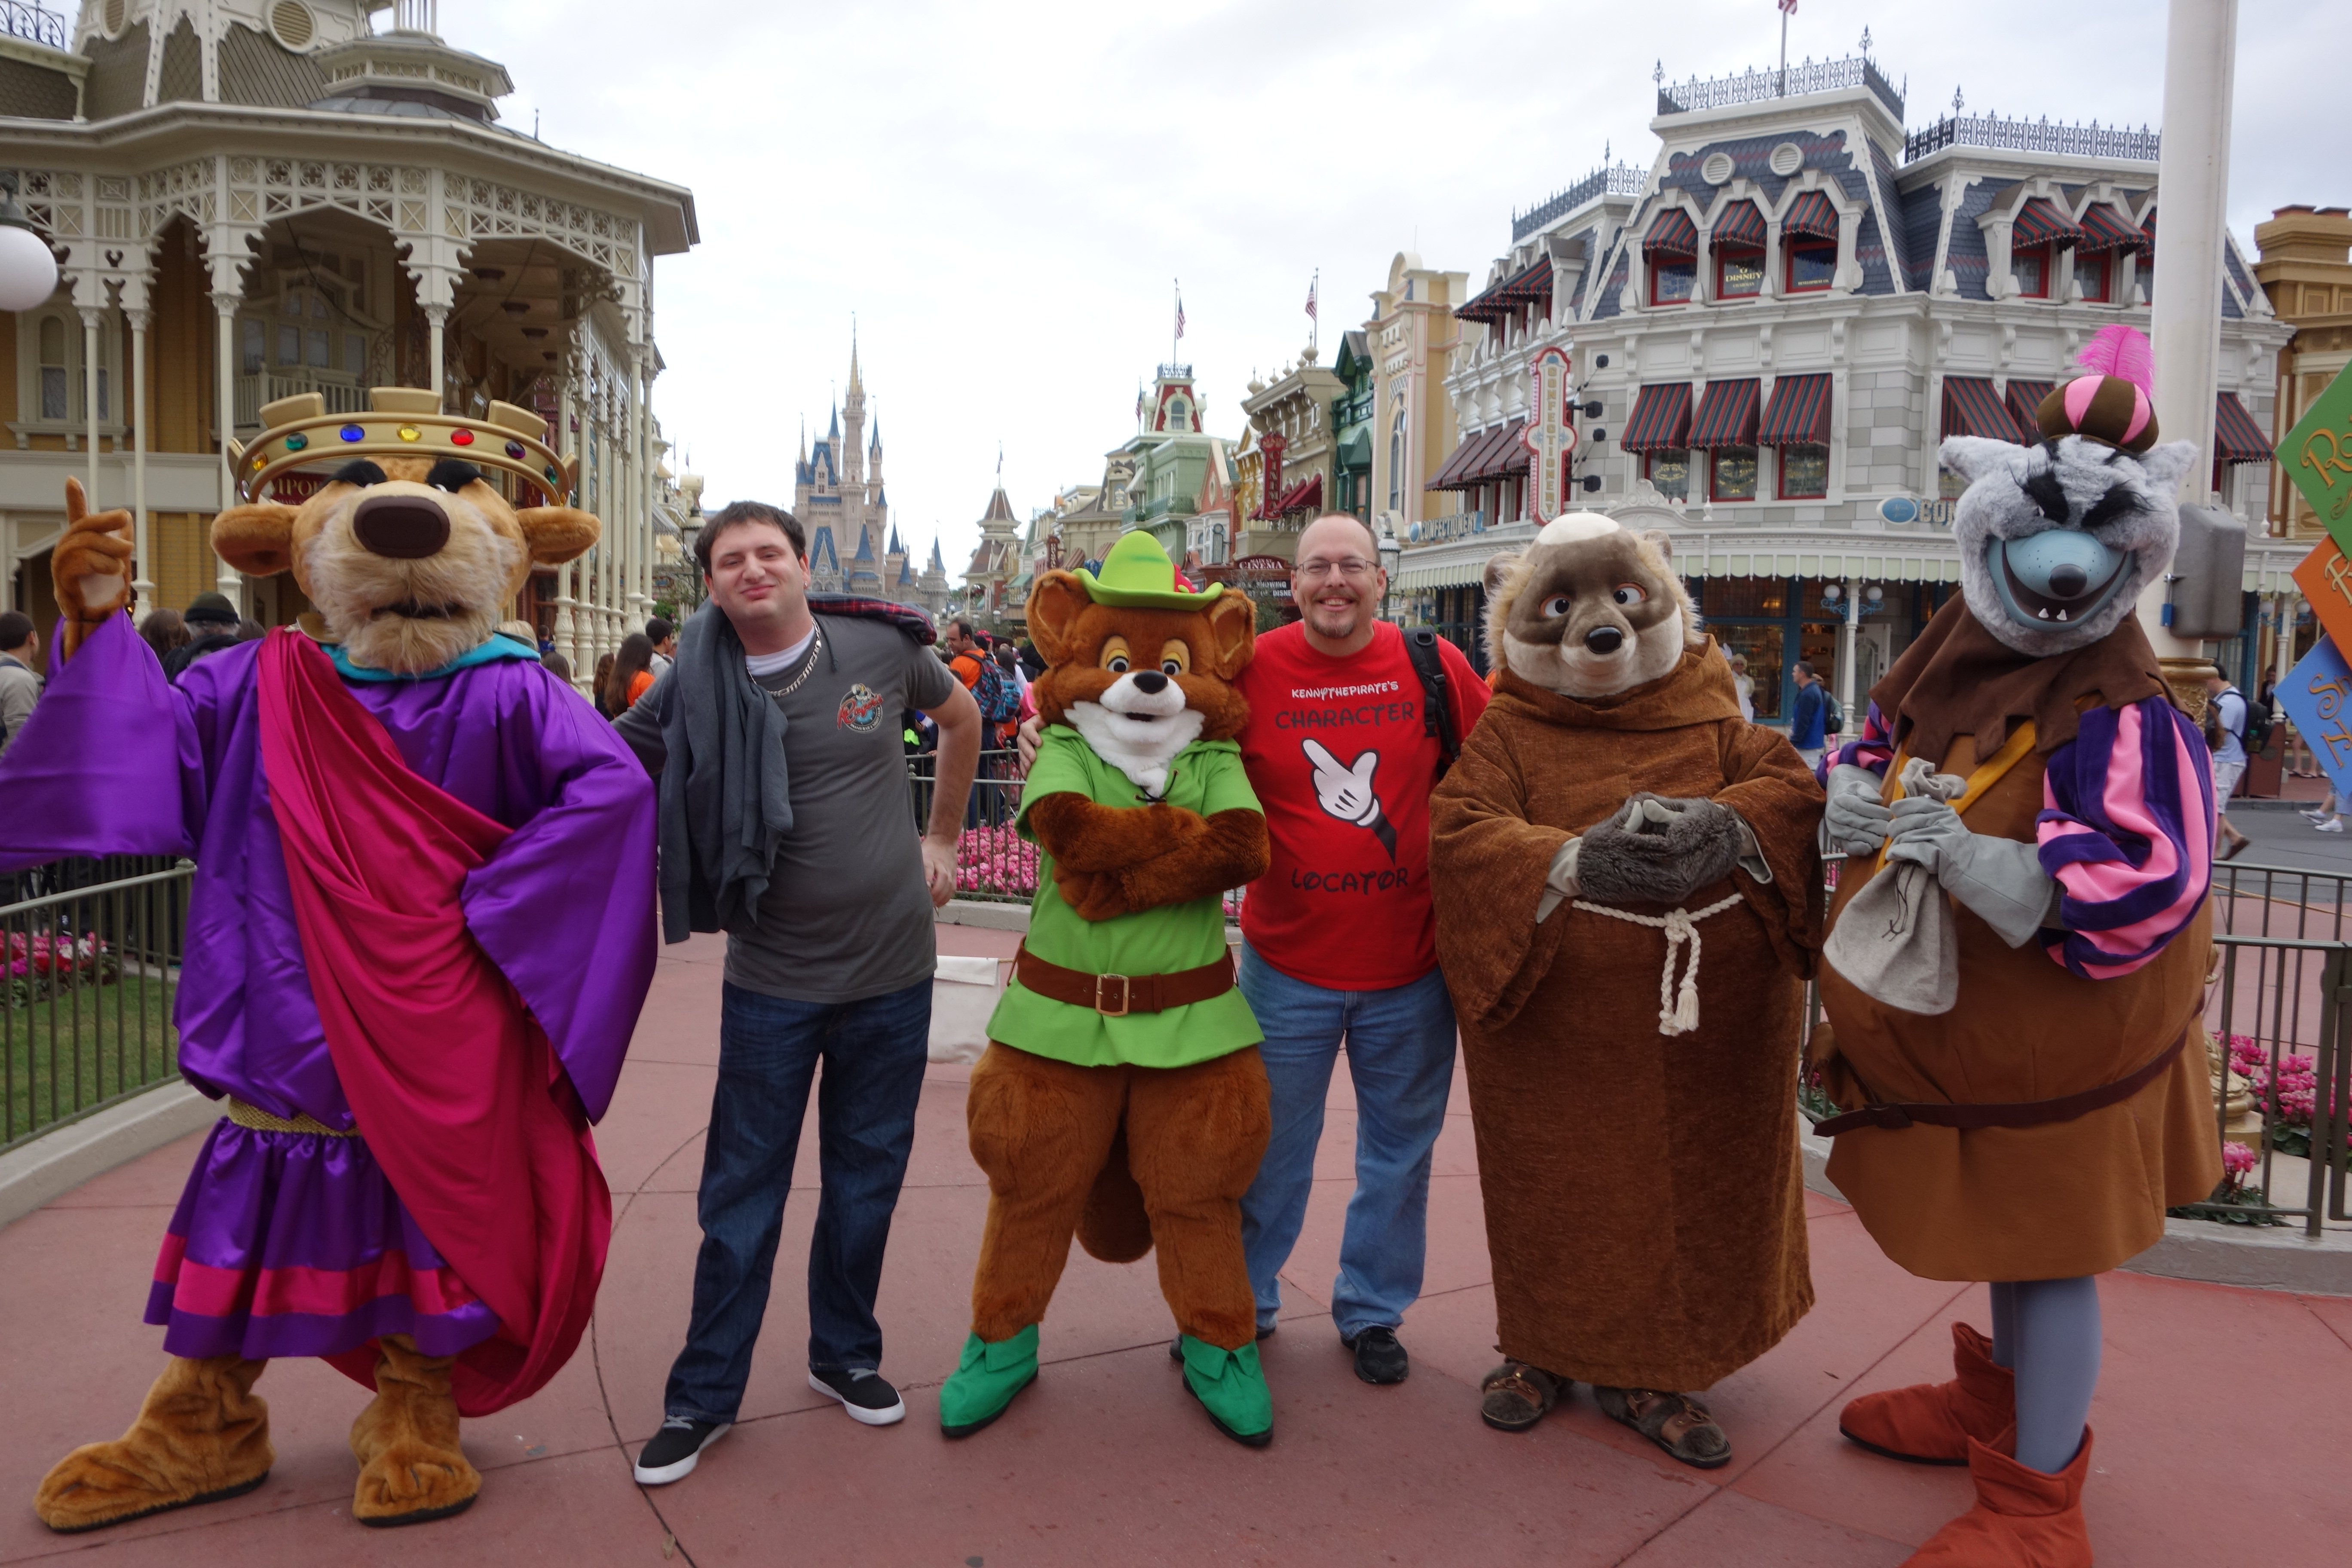 My buddy Josh was off in the morning, so he met some characters with me.